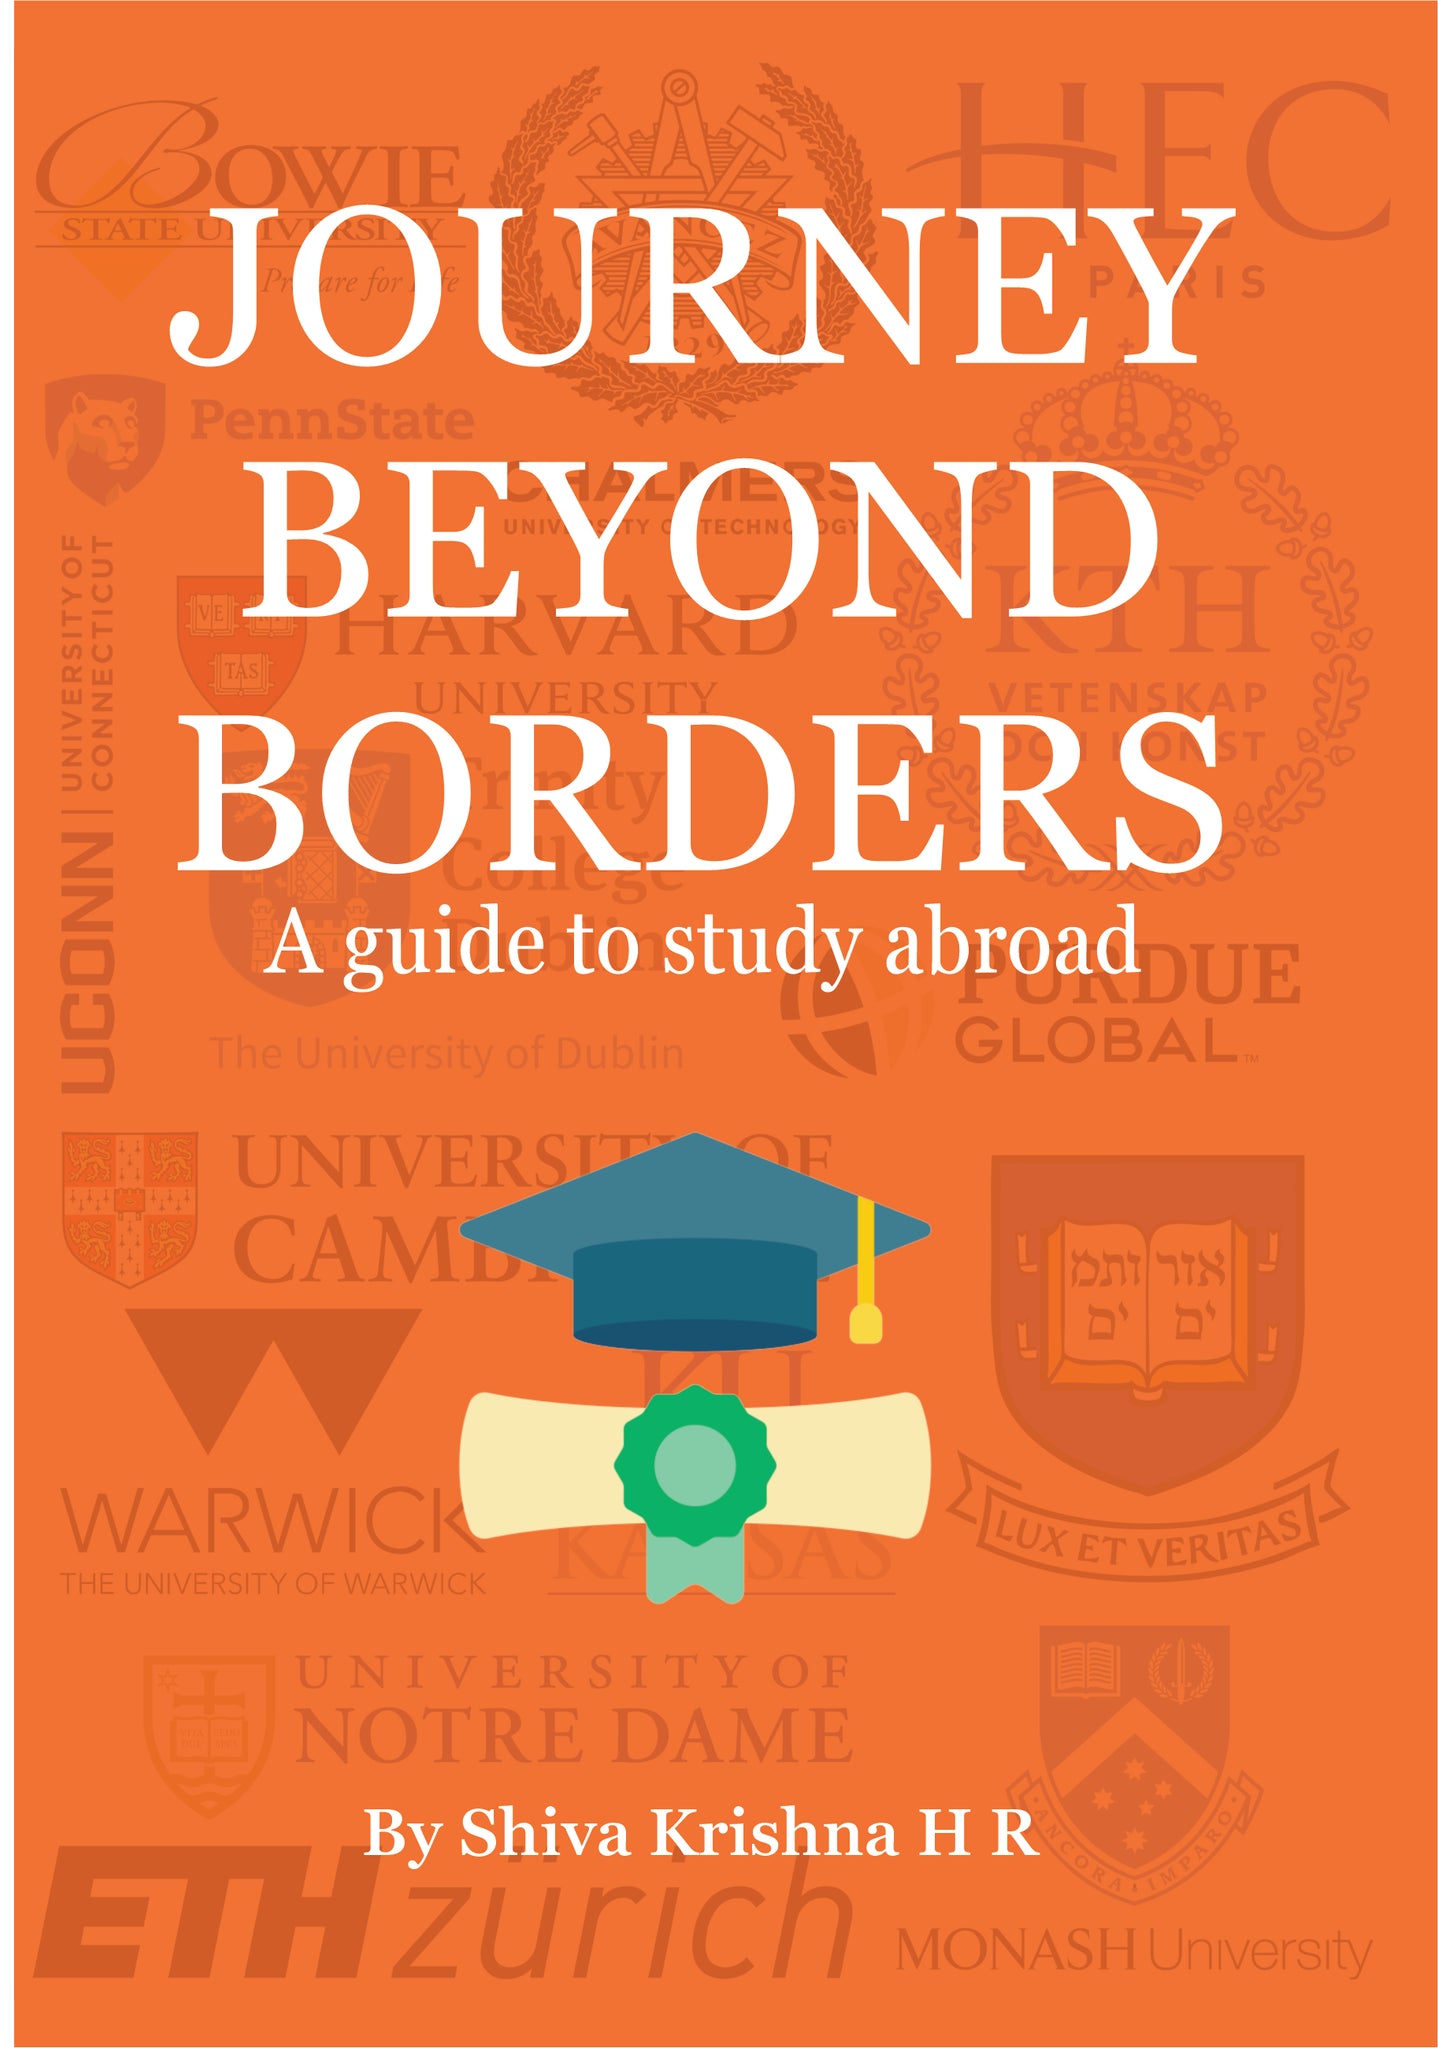 Journey Beyond Border: A guide to study abroad